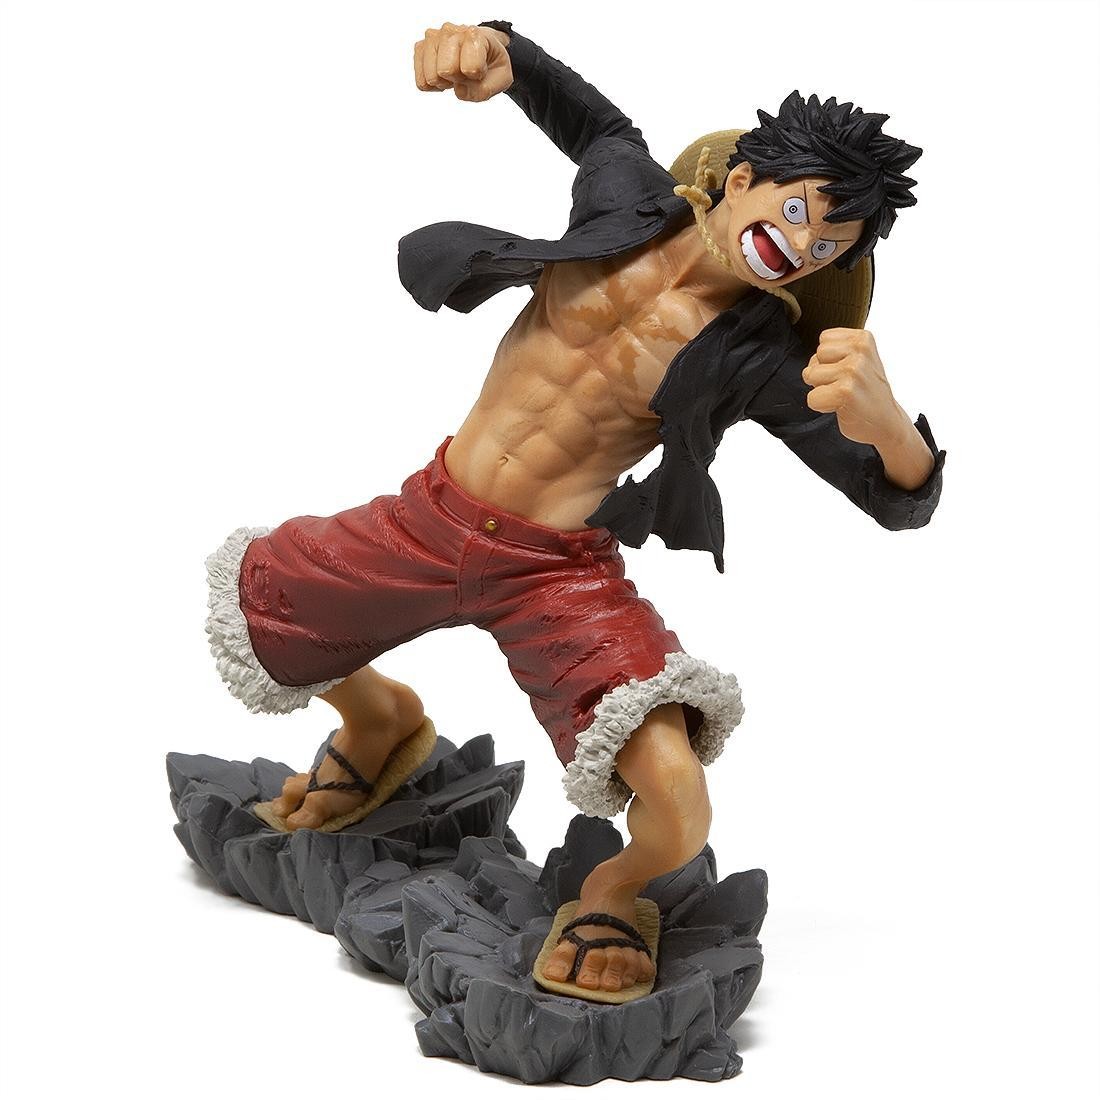 20th anniversary one piece figures